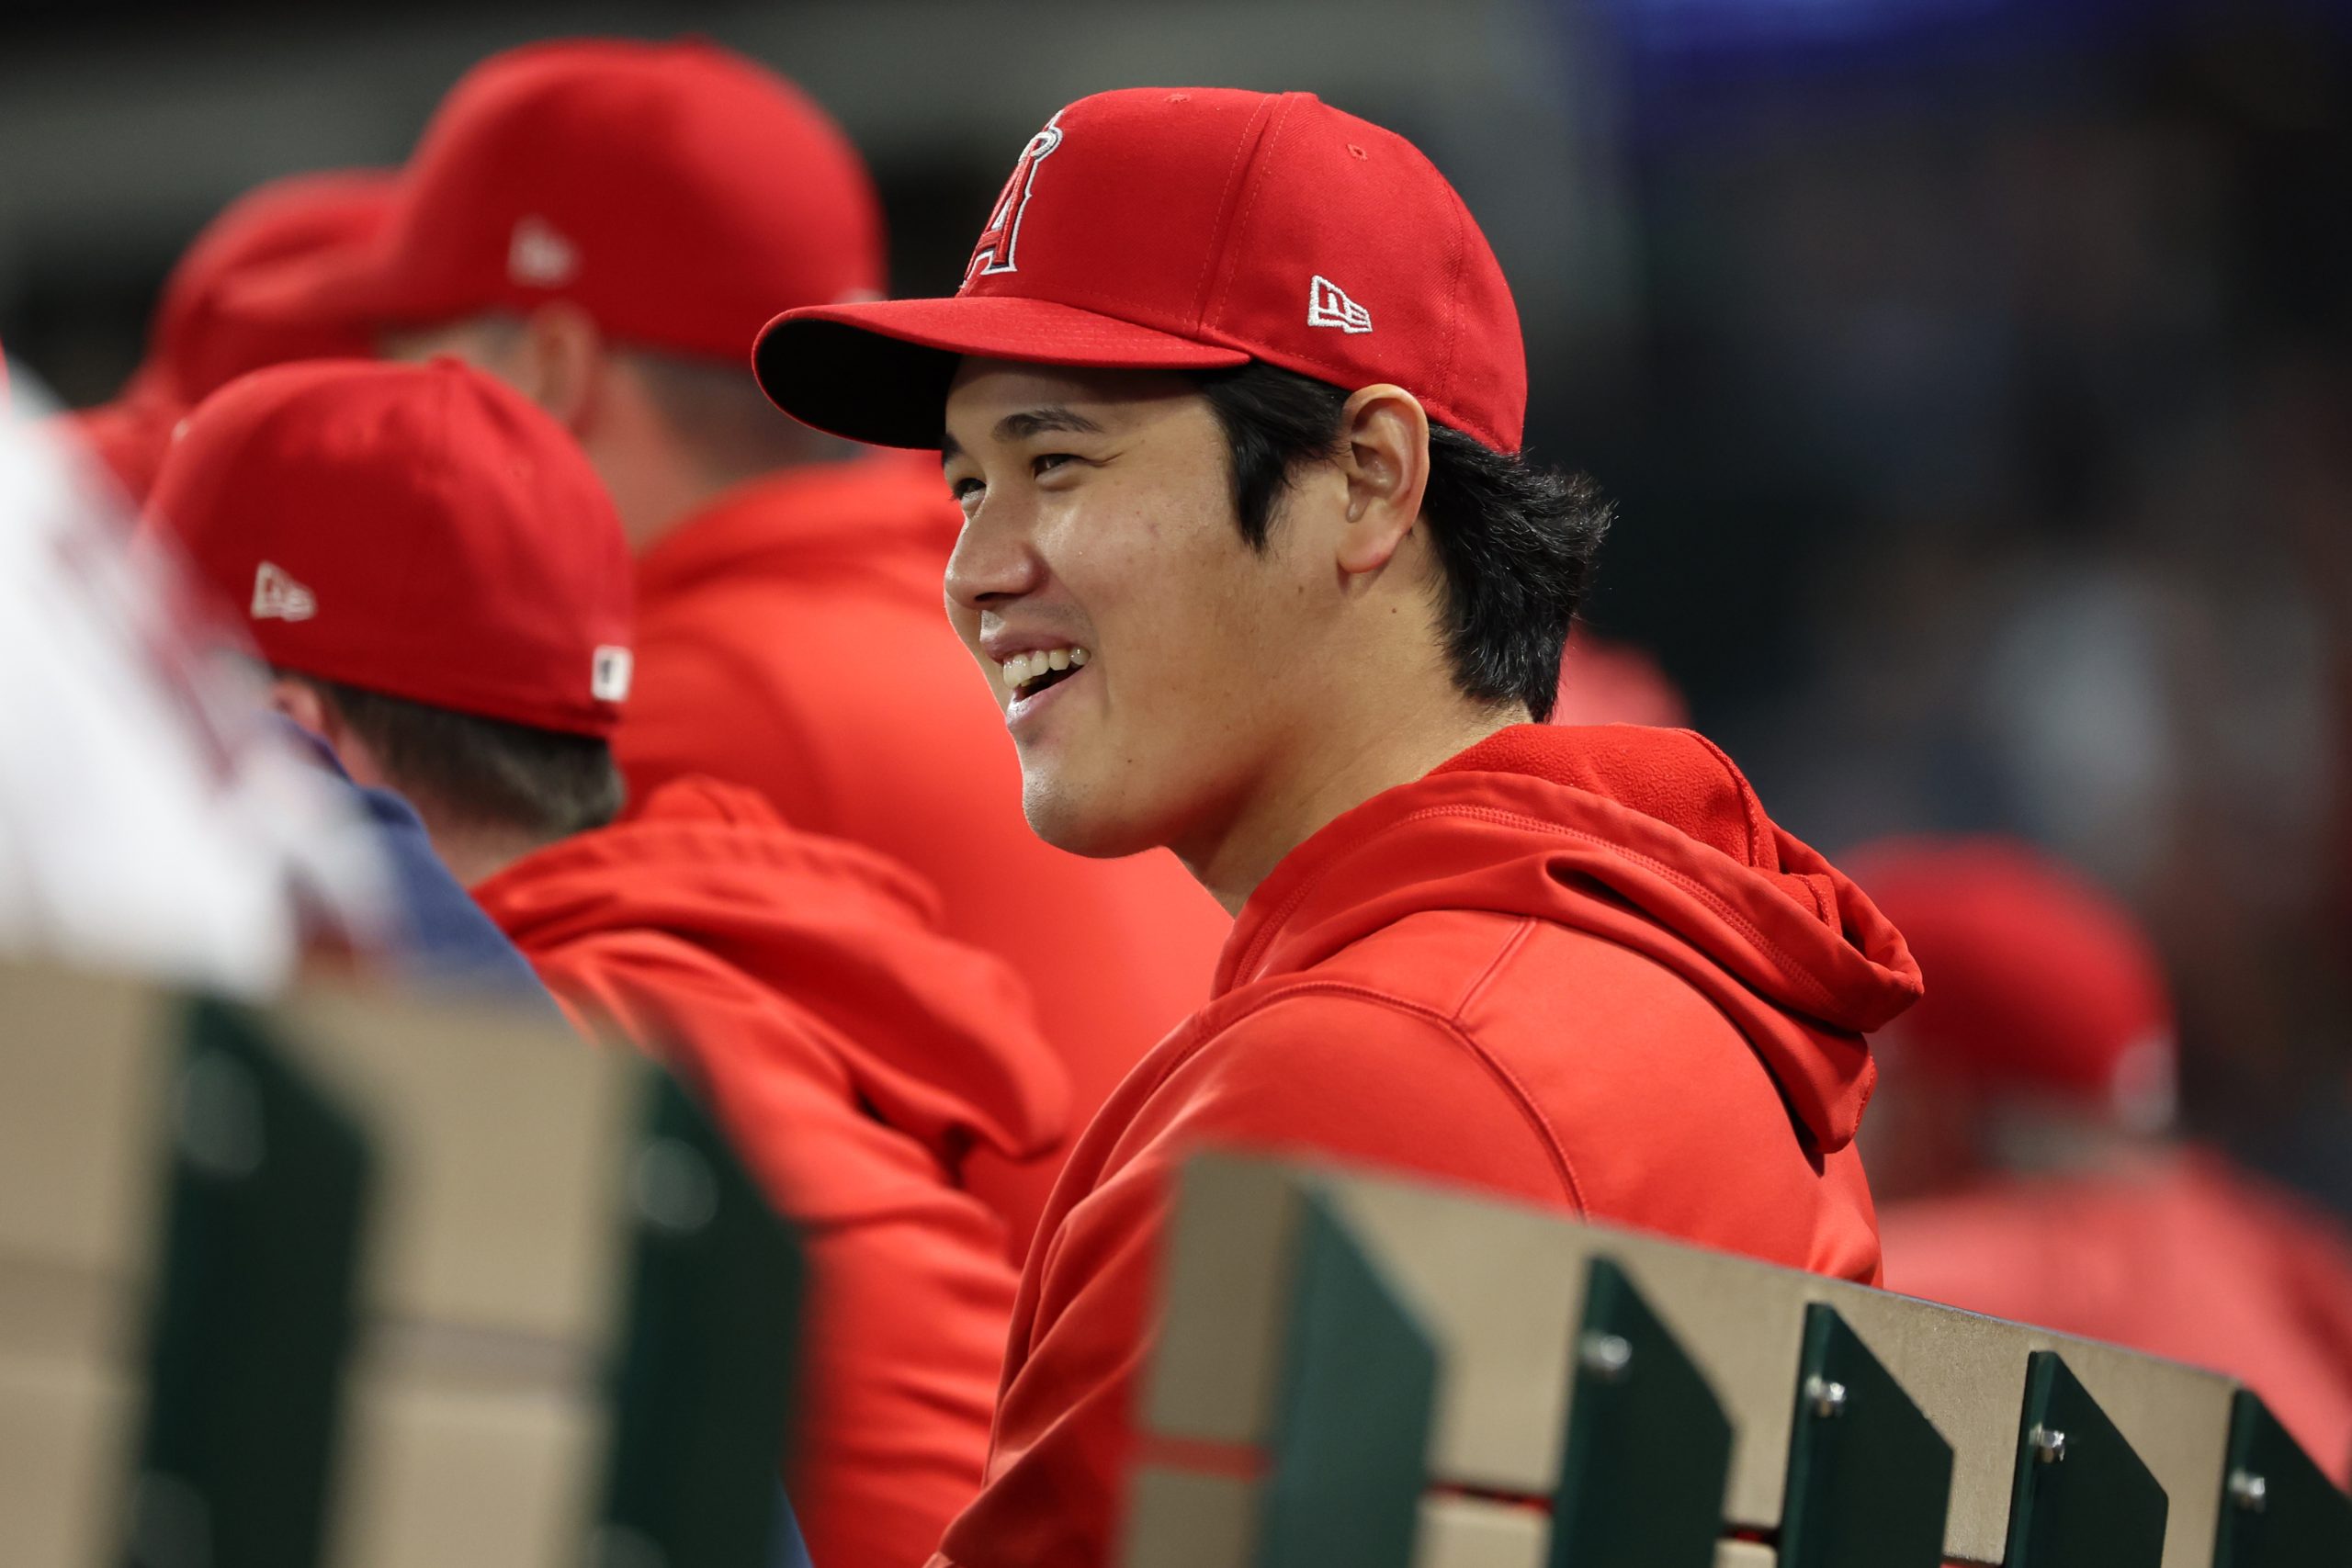 A look at the history of Shohei Ohtani